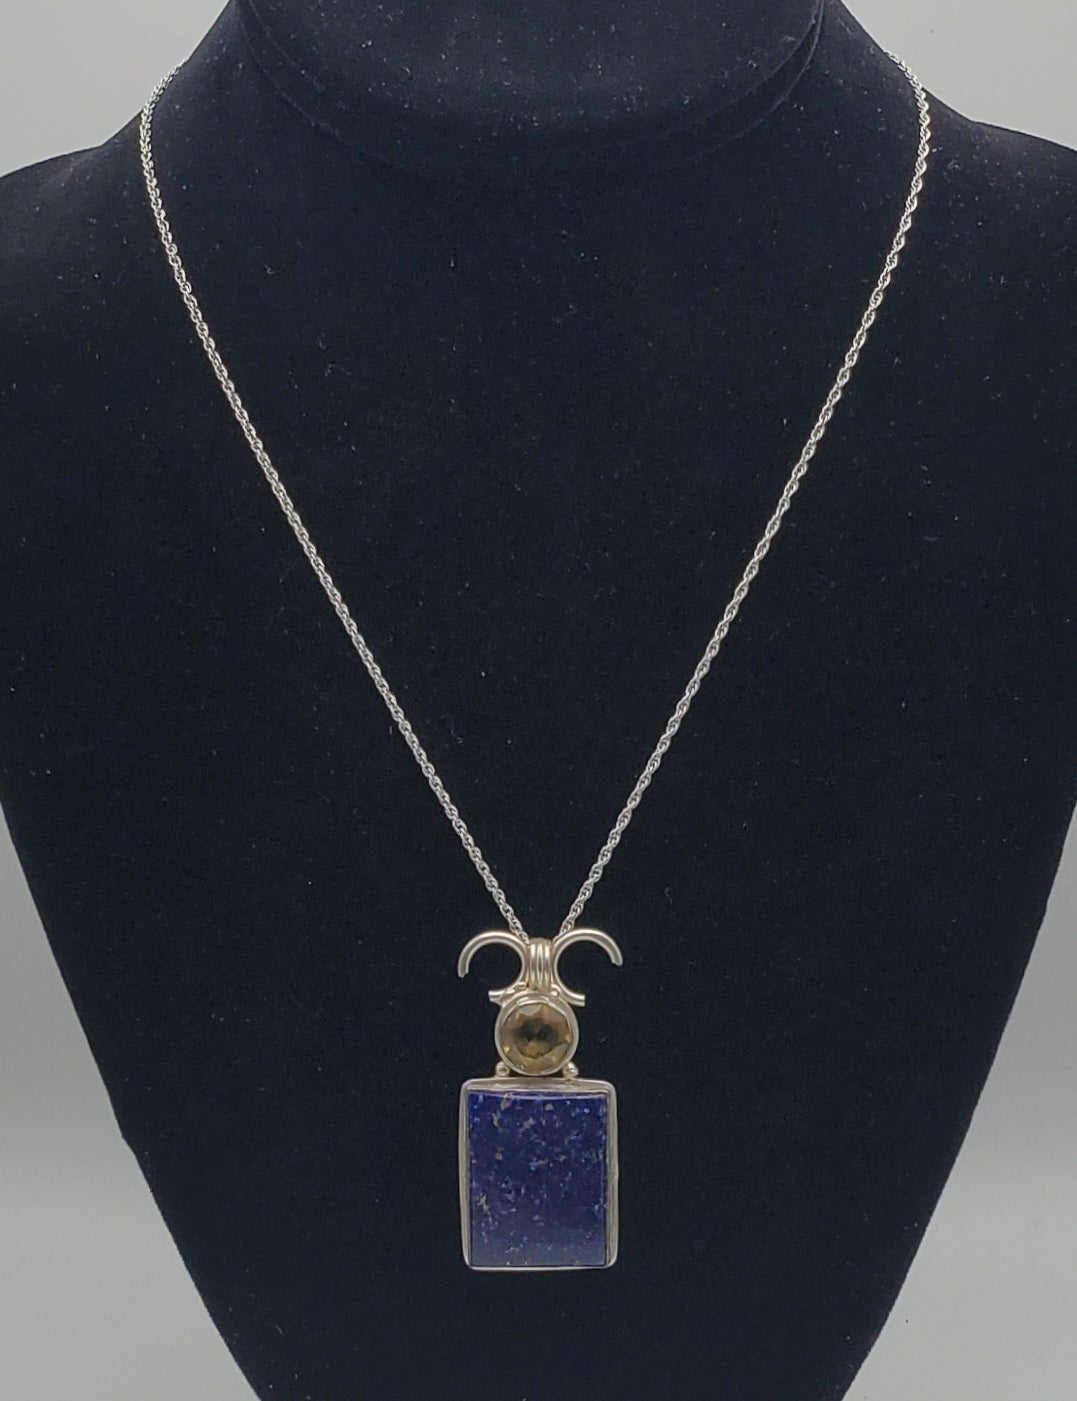 Lapis Lazuli Sterling Silver Pendant on Sterling Silver Chain Necklace - 18"